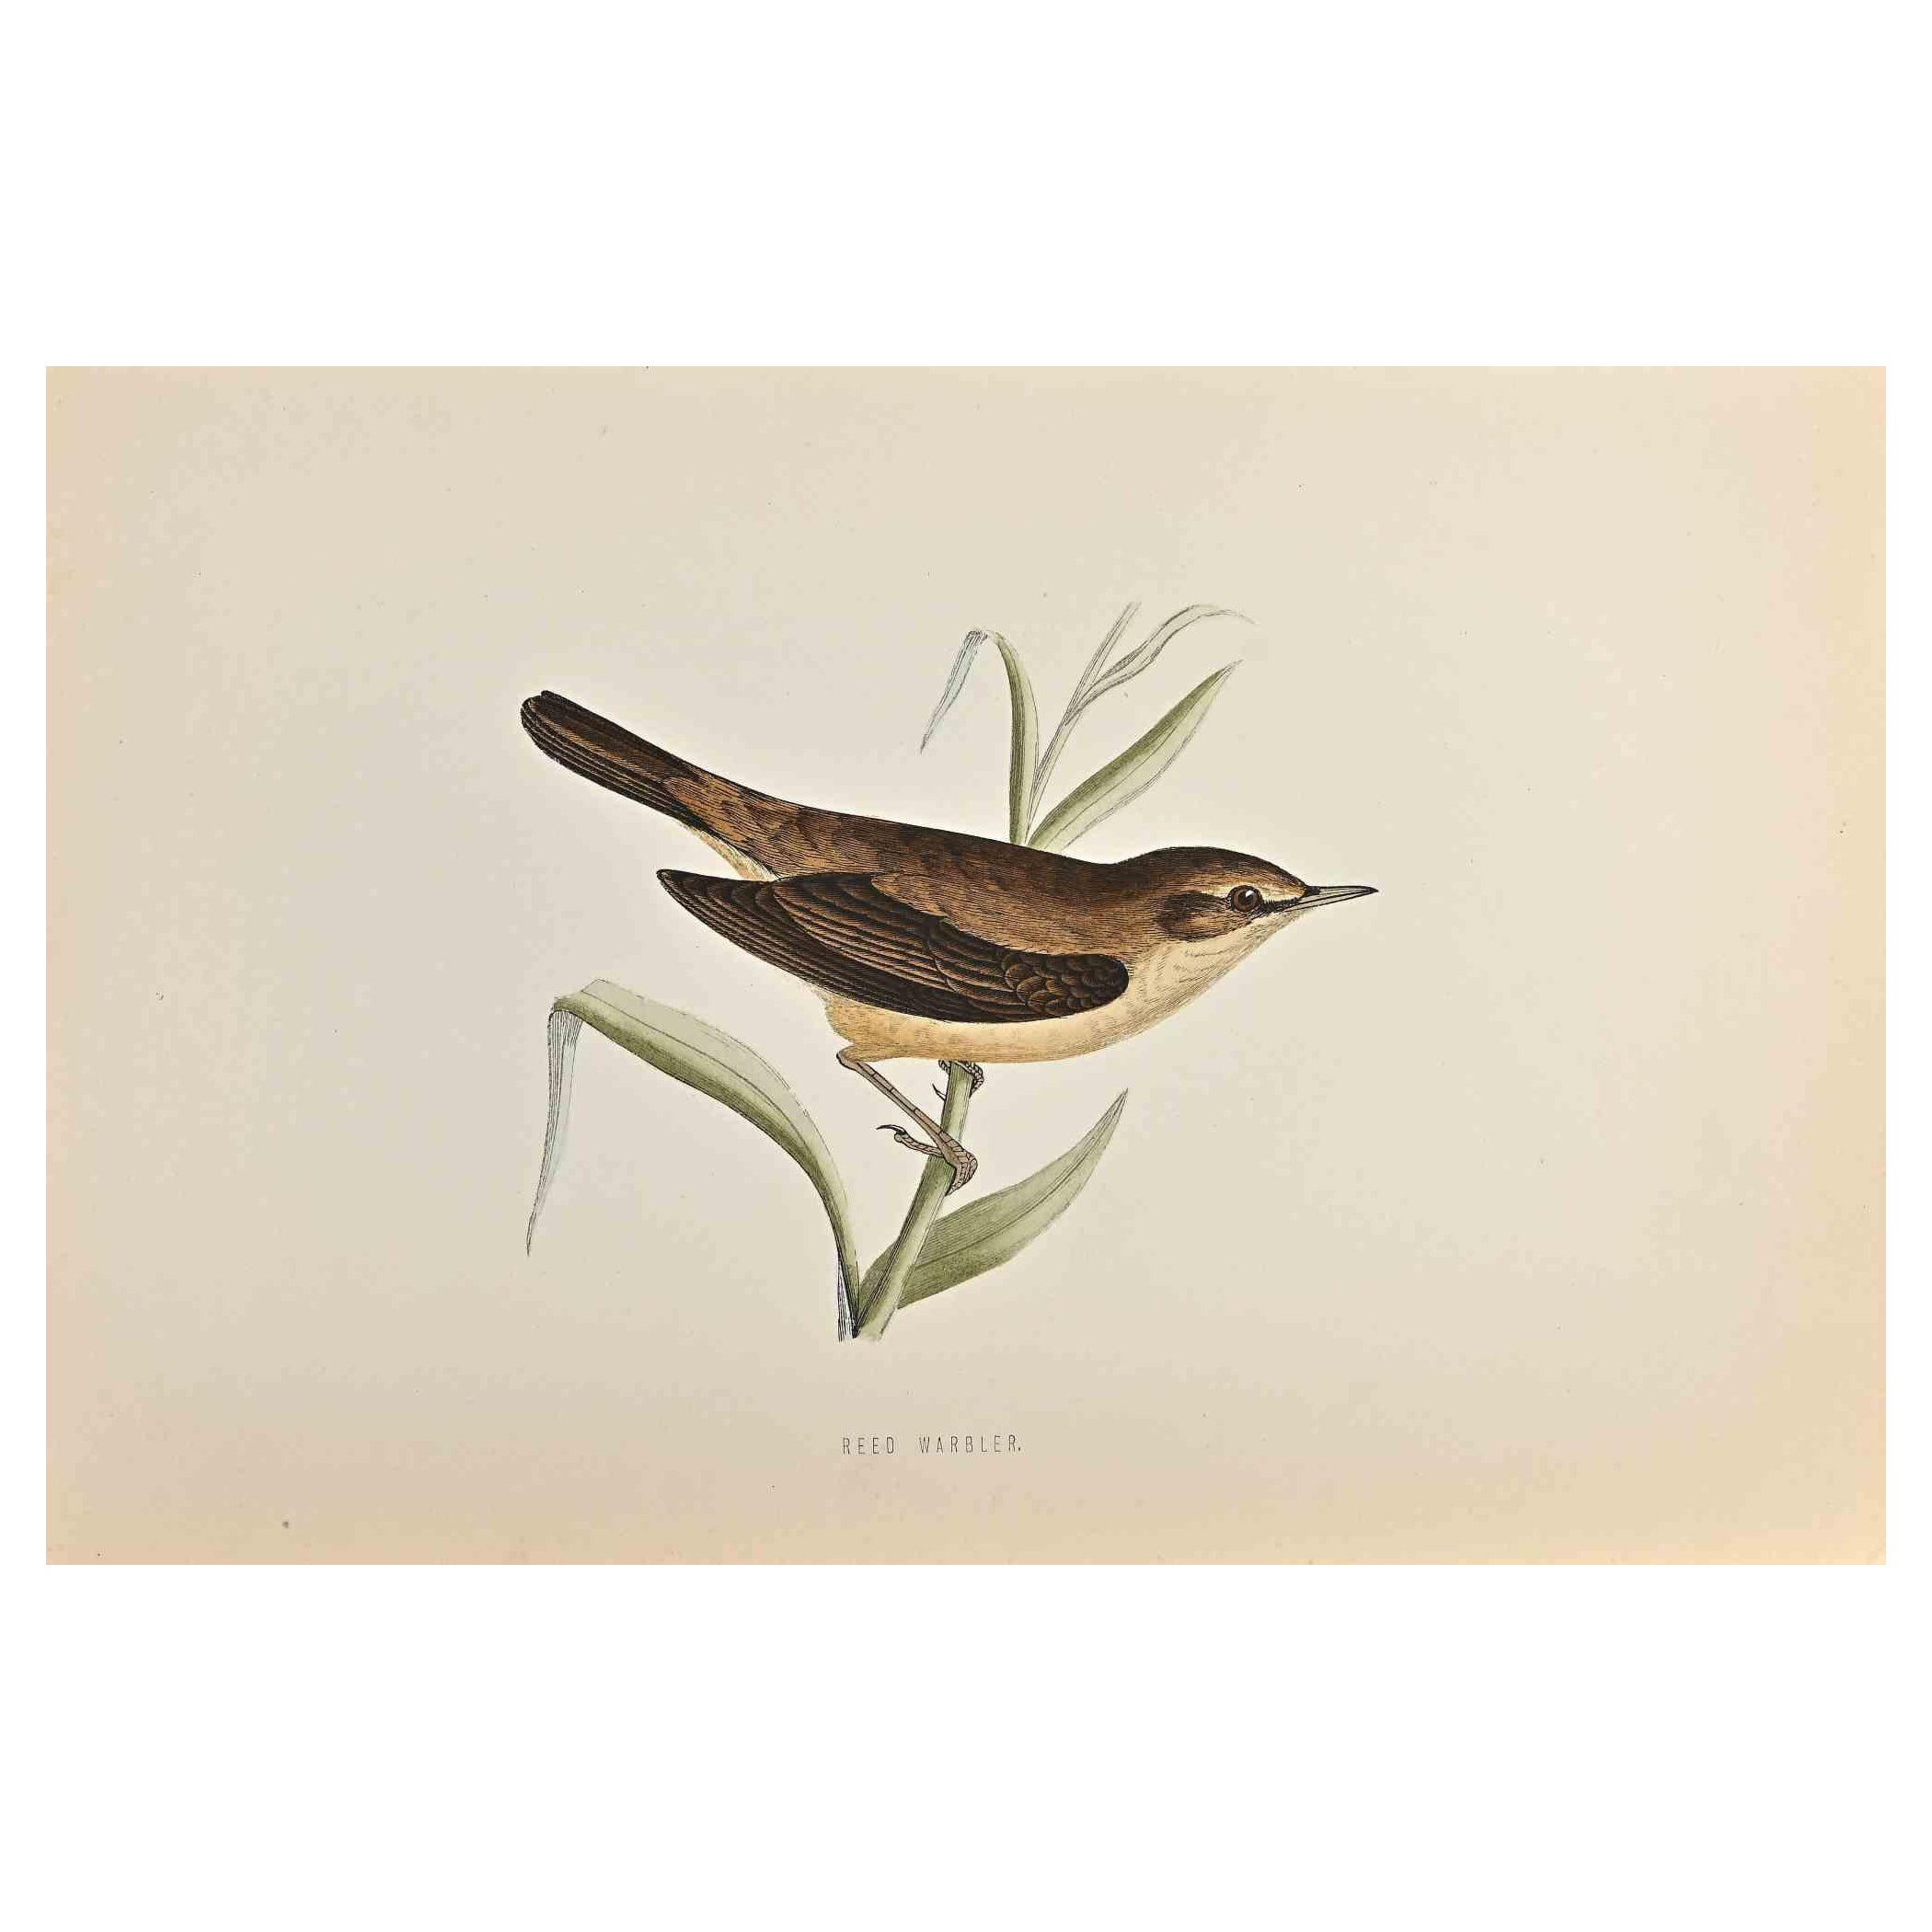 Reed Warbler is a modern artwork realized in 1870 by the British artist Alexander Francis Lydon (1836-1917) . 

Woodcut print, hand colored, published by London, Bell & Sons, 1870.  Name of the bird printed in plate. This work is part of a print